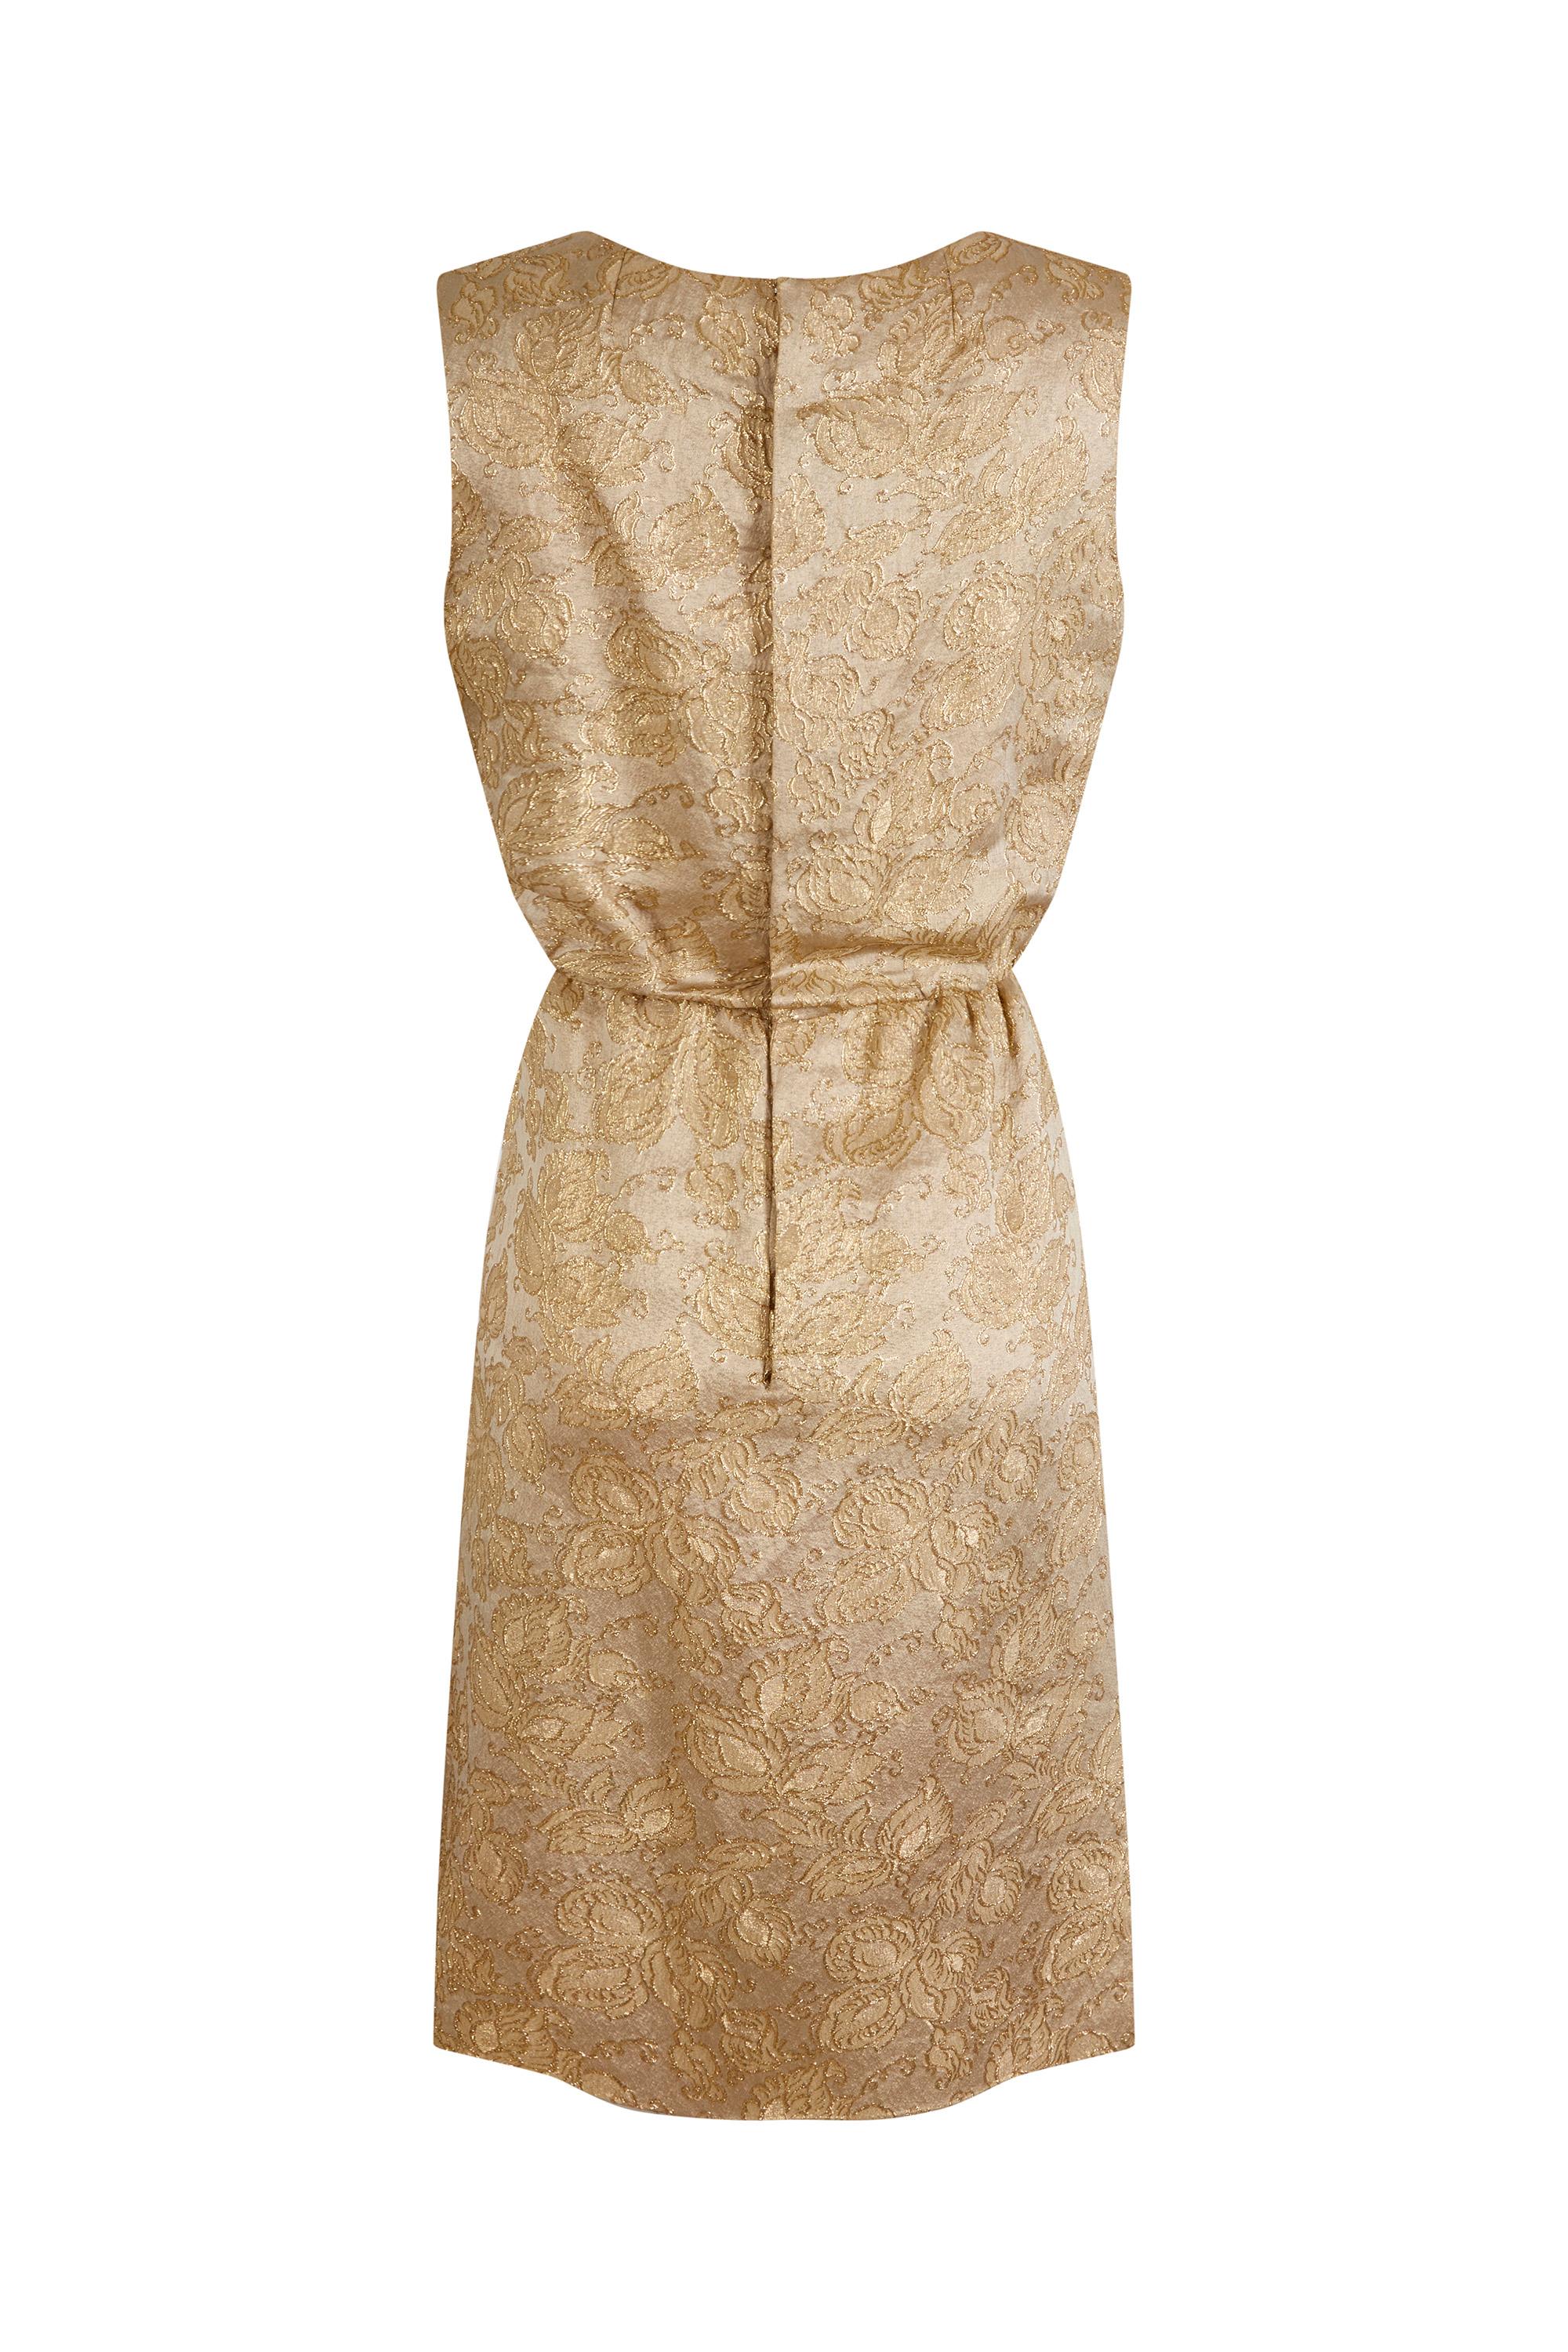 Brown 1950s Jacques Heim Demi Couture Gold Brocade Dress For Sale